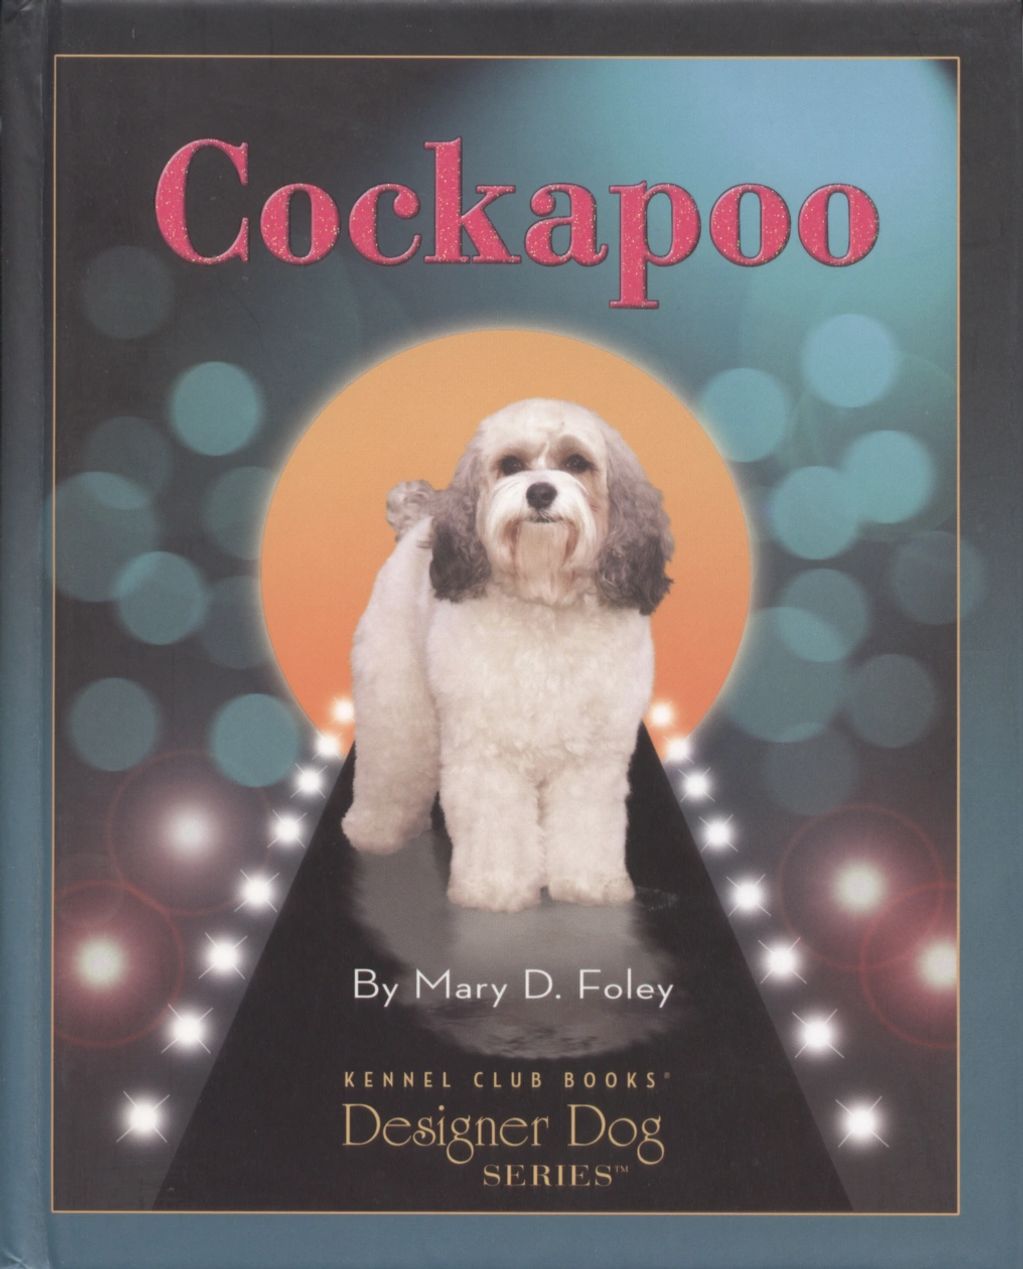 Debbie and her Cockapoos are mentioned in the Kennel Club Books Designer Dog Series, Cockapoo.